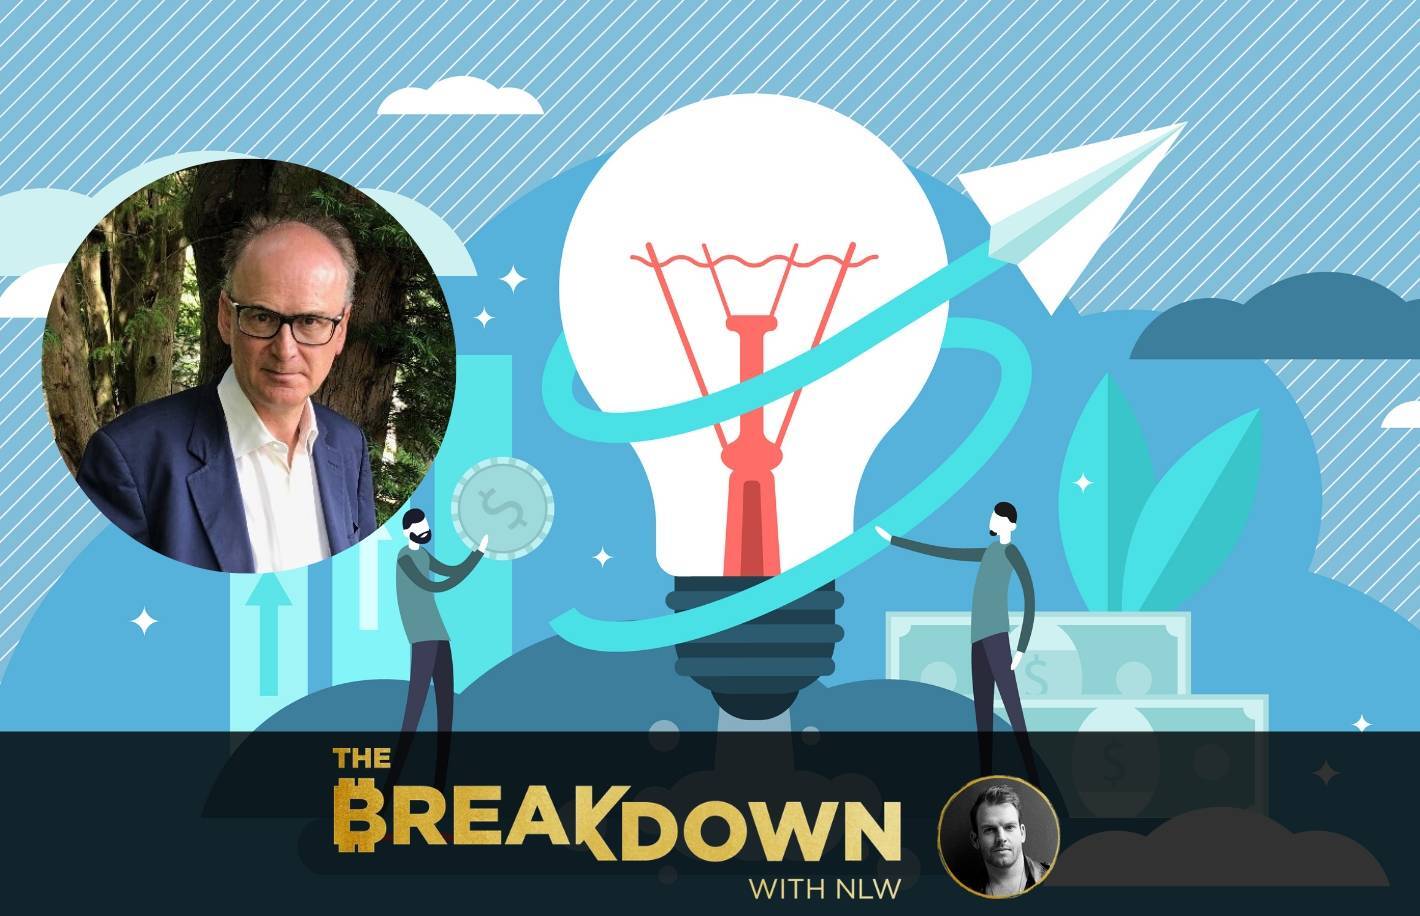 Why-innovation-matters-(and-how-not-to-screw-it-up),-feat.-matt-ridley